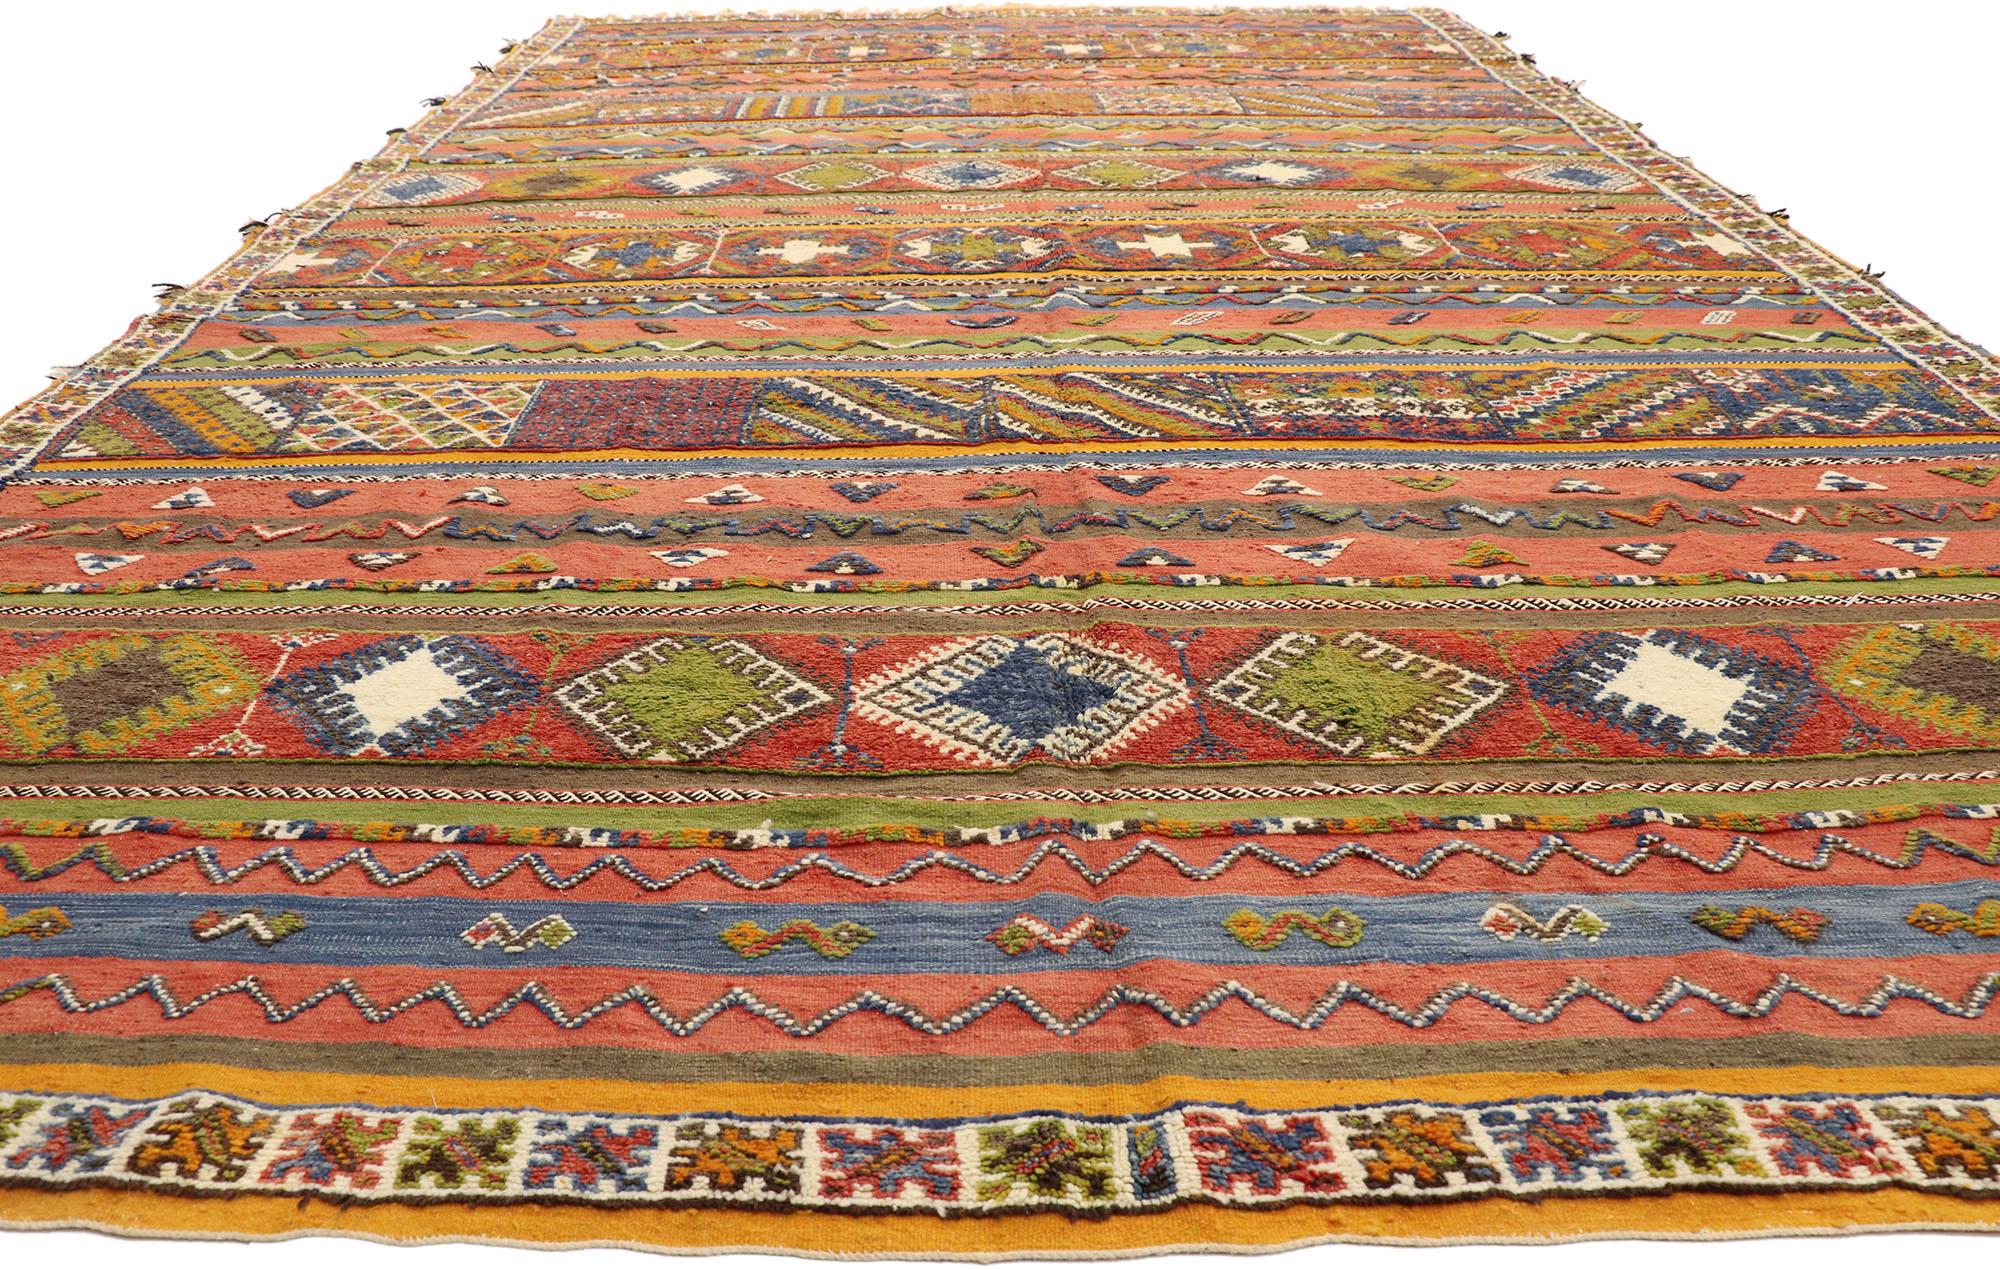 Embroidered Vintage Berber Moroccan Kilim Glaoui Rug with Modern Tribal Style